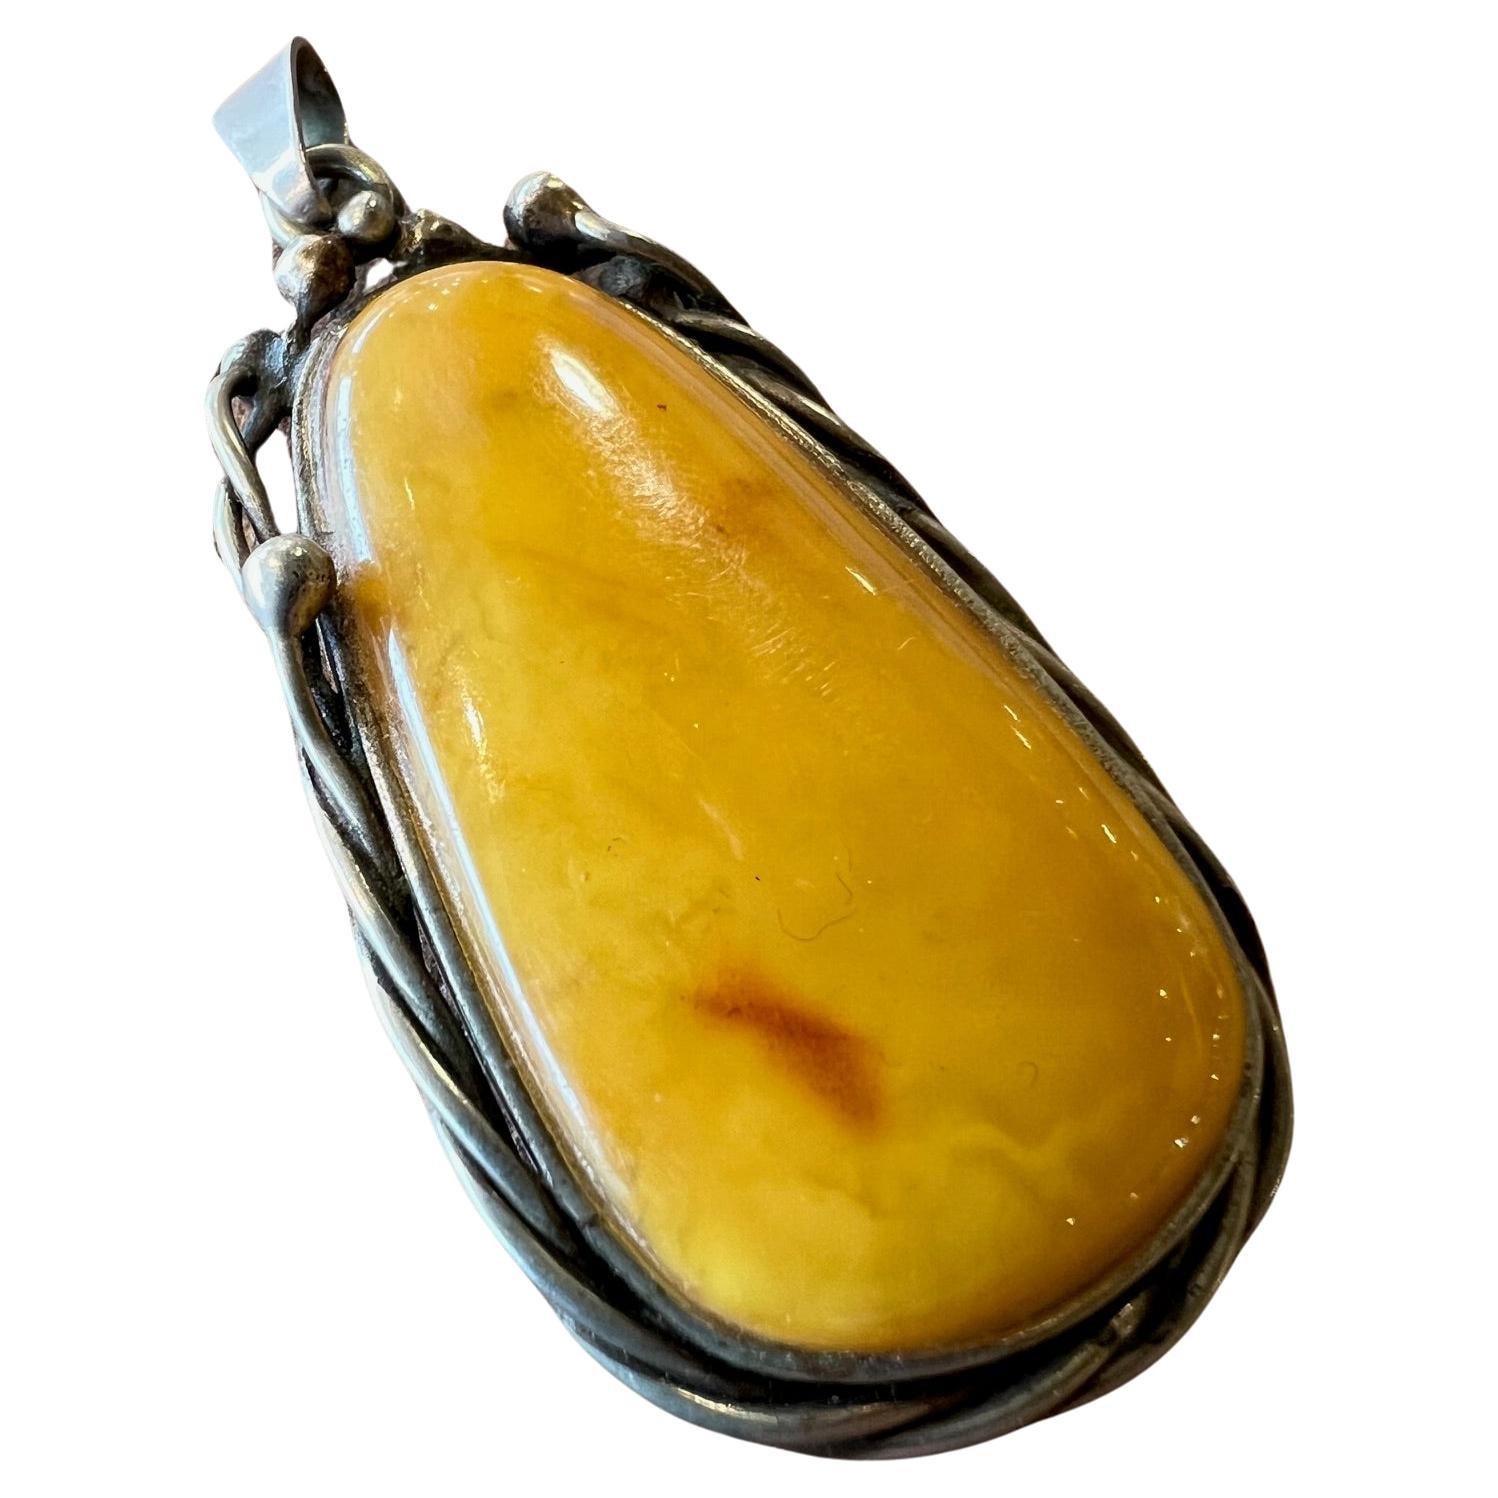 Vintage Yellow Baltic Amber Pendant from Latvia